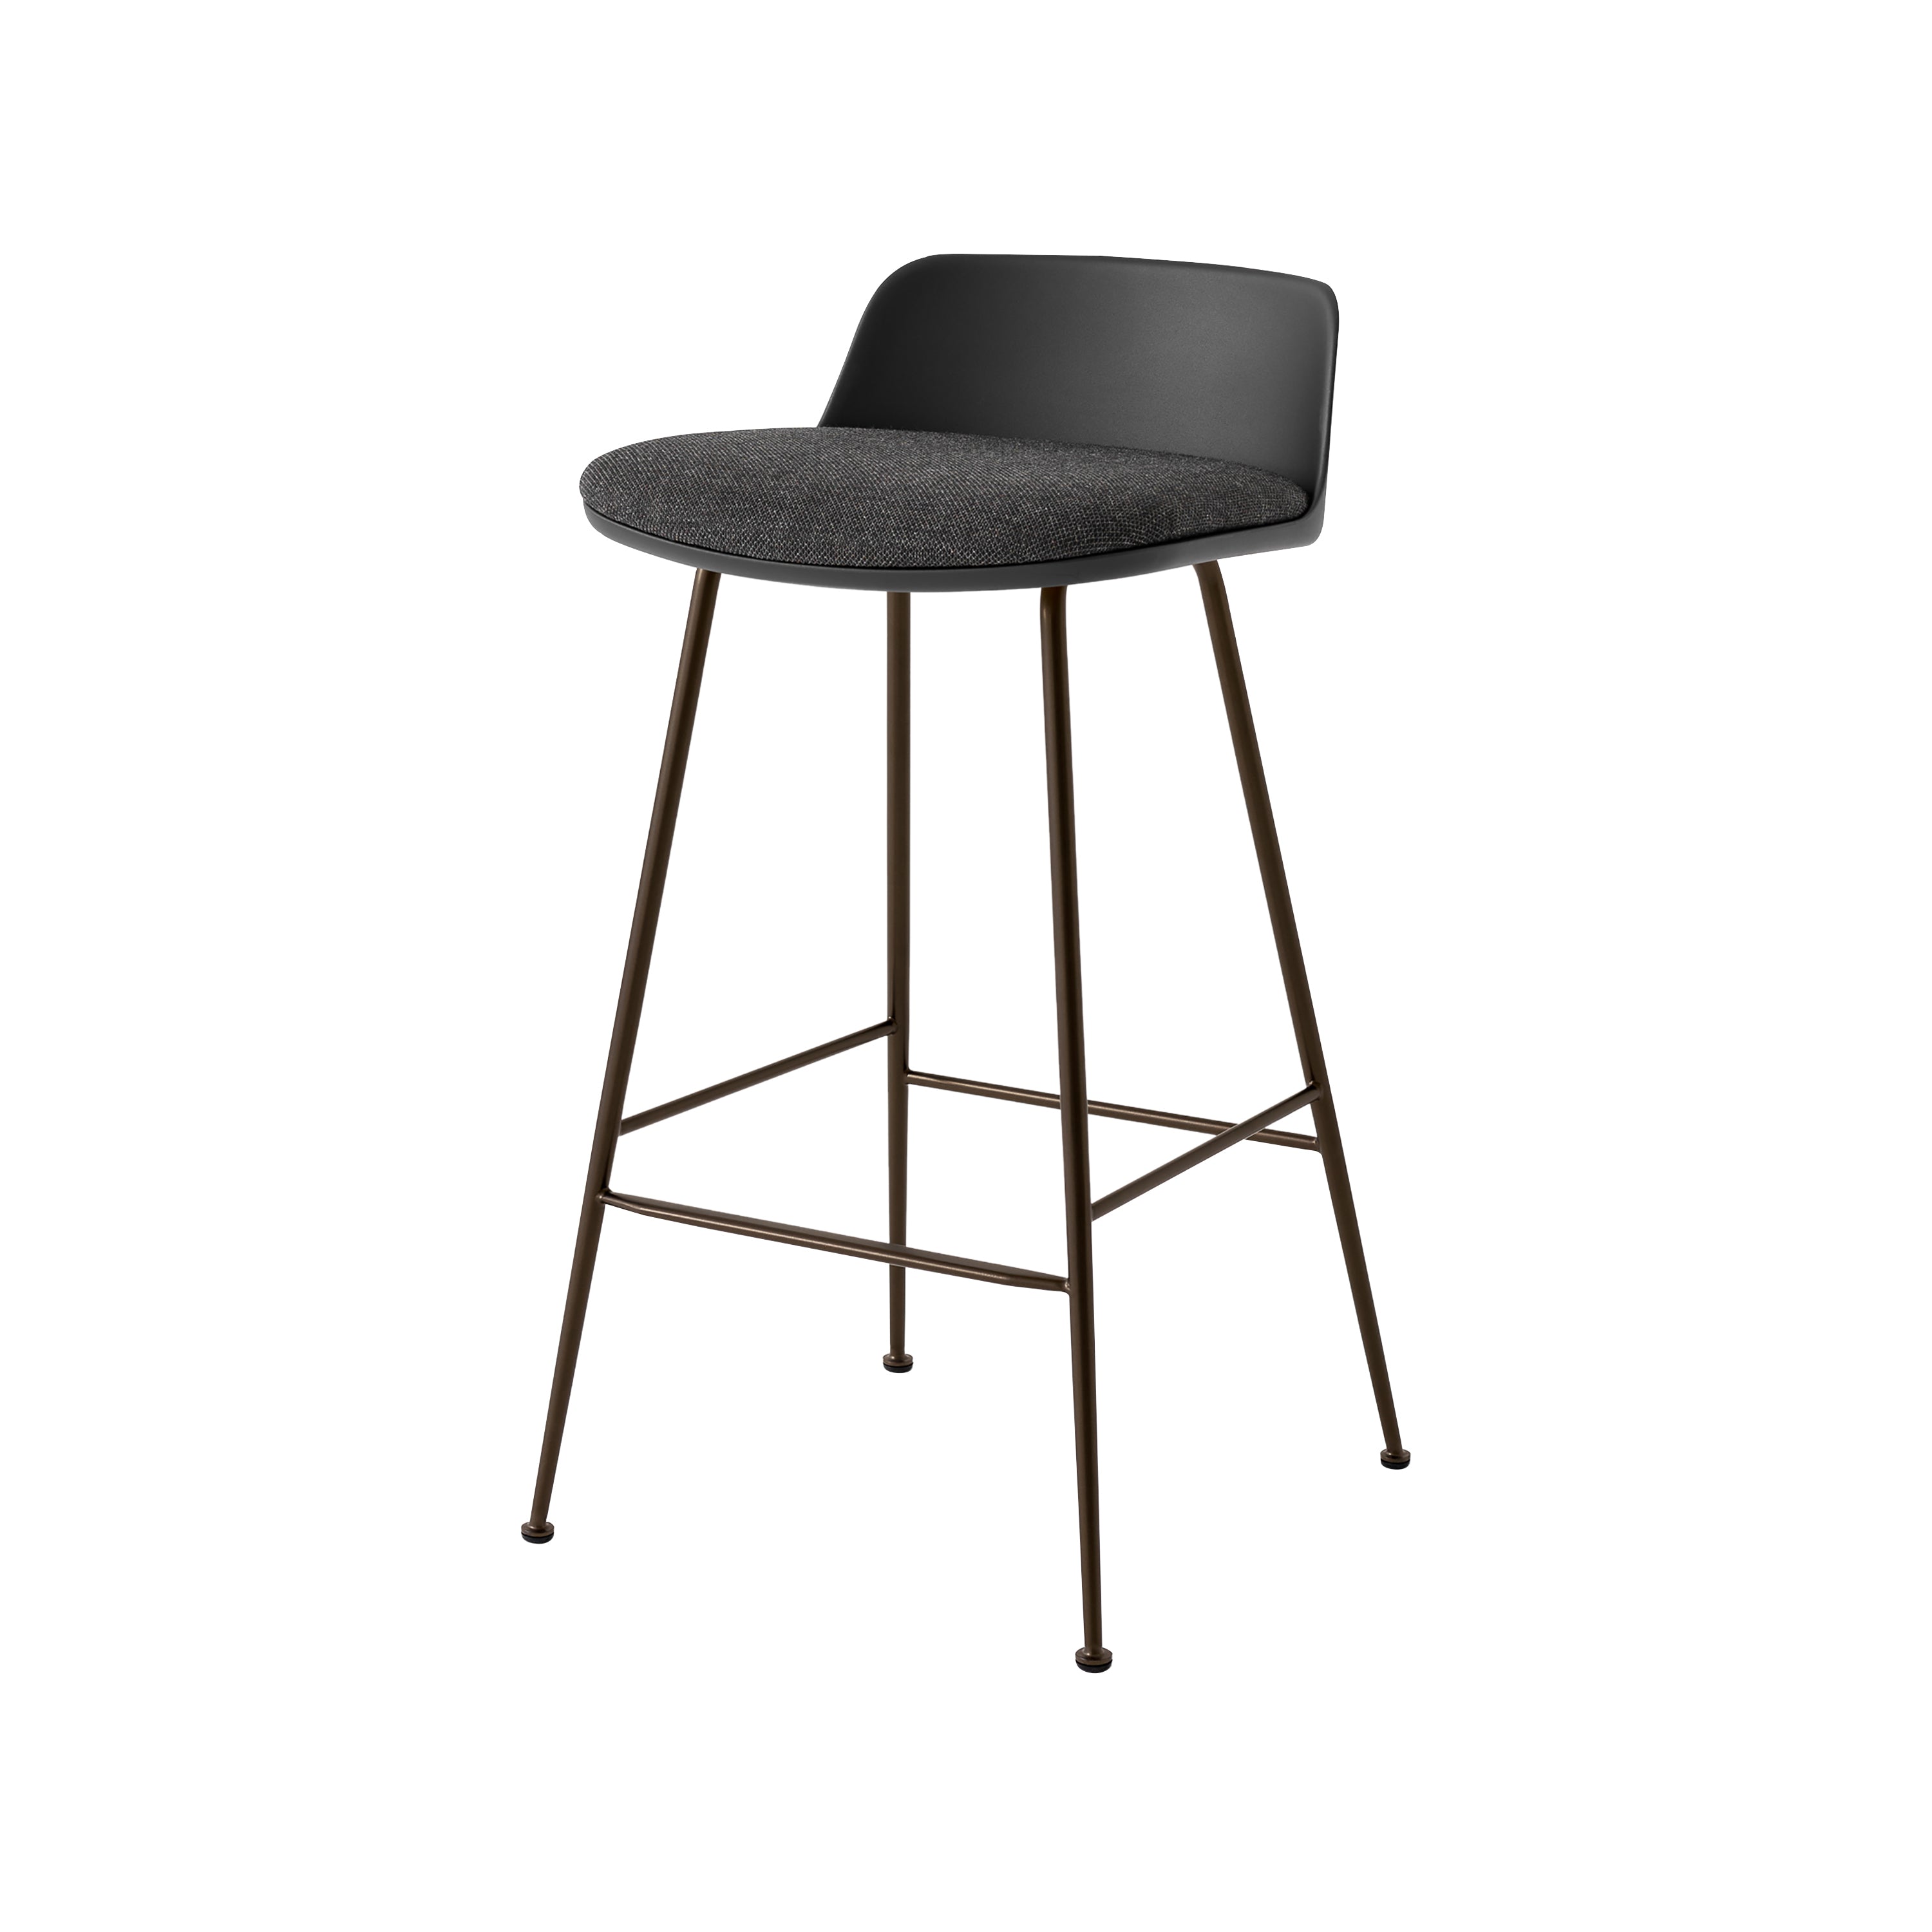 Rely Counter Stool: HW82 + Black + Bronzed